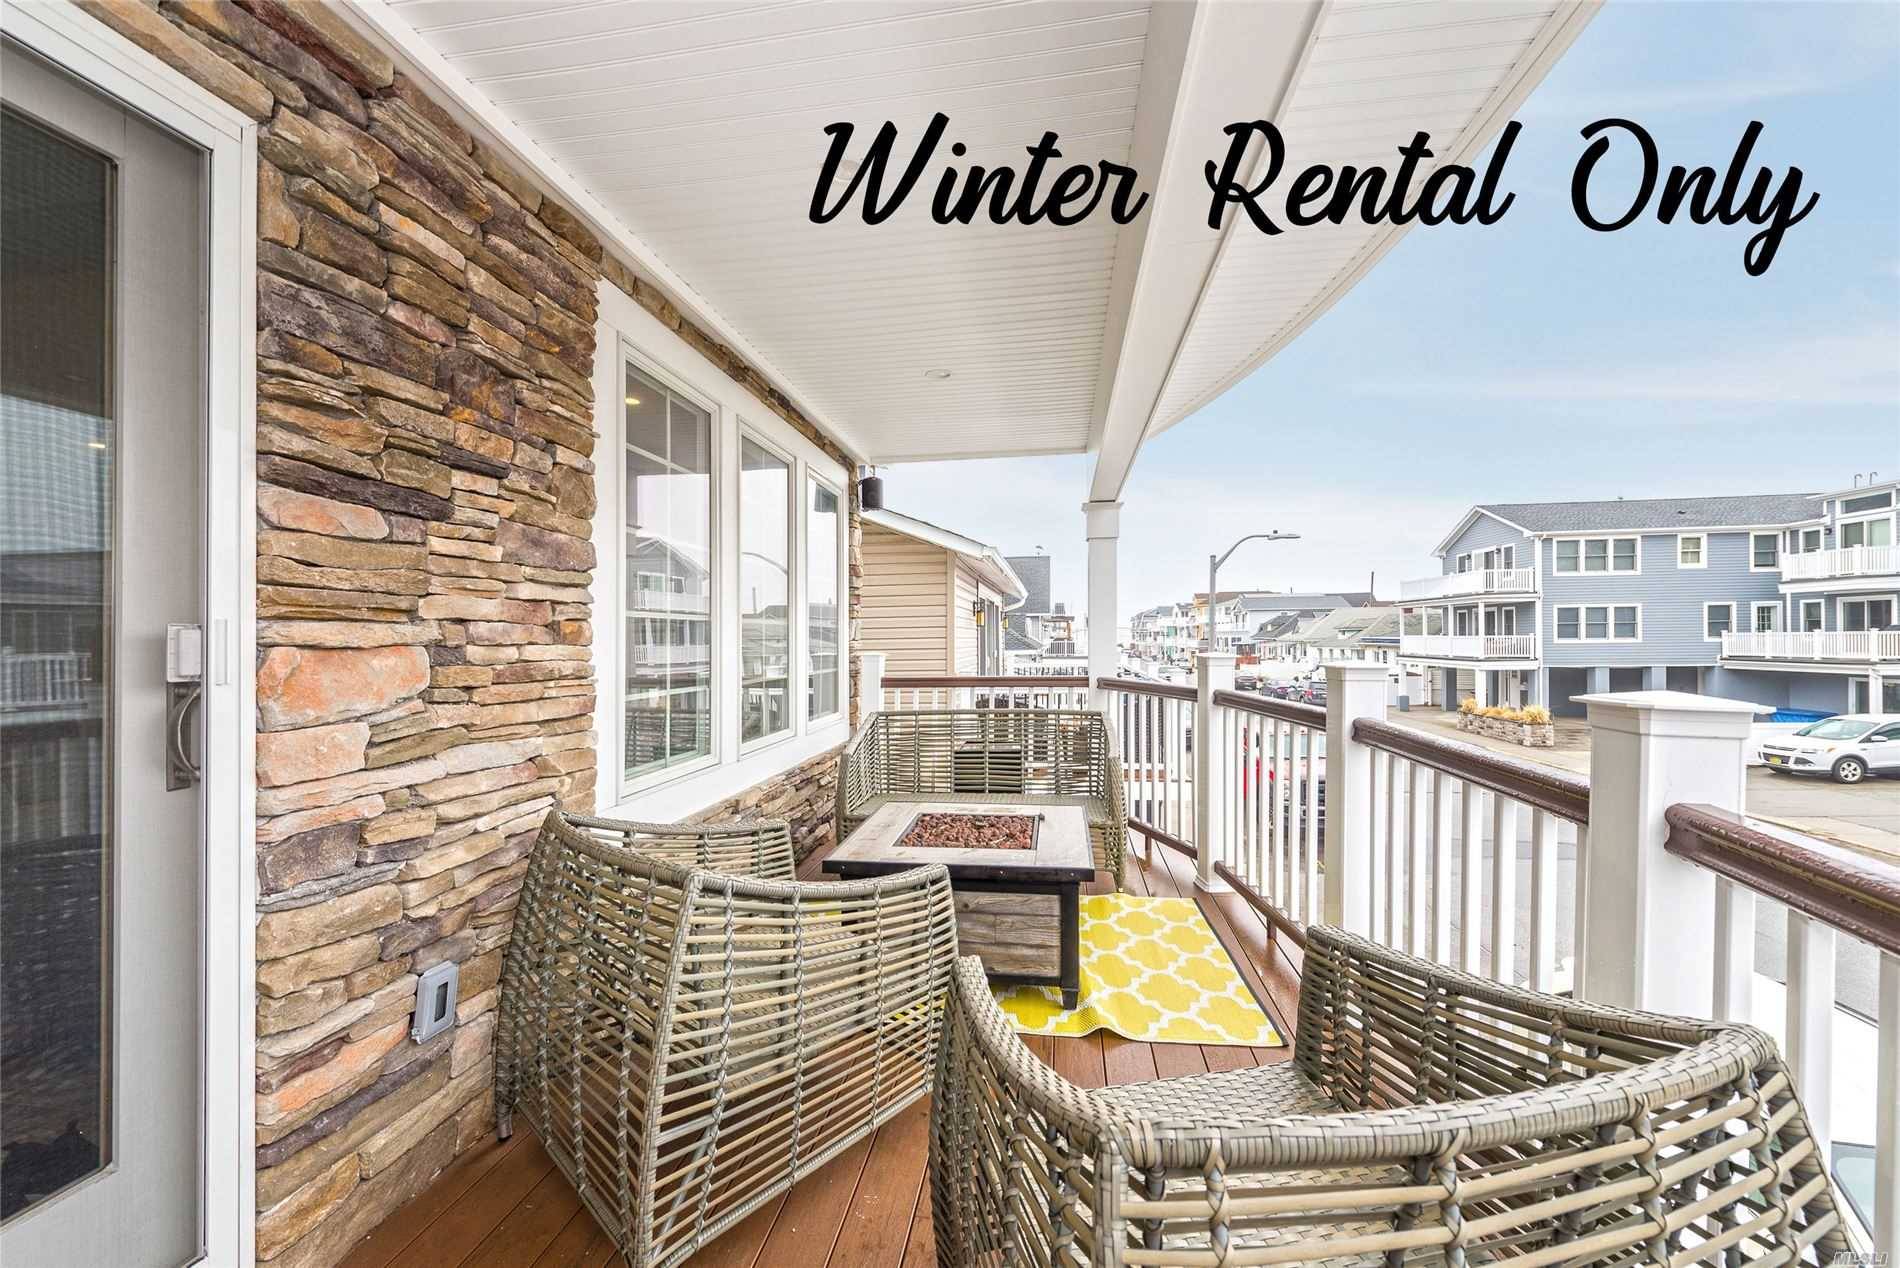 WINTER Rental Only. Gorgeous, Spacious, Clean amp ; Bright West End Home, Raised Fema Compliant.